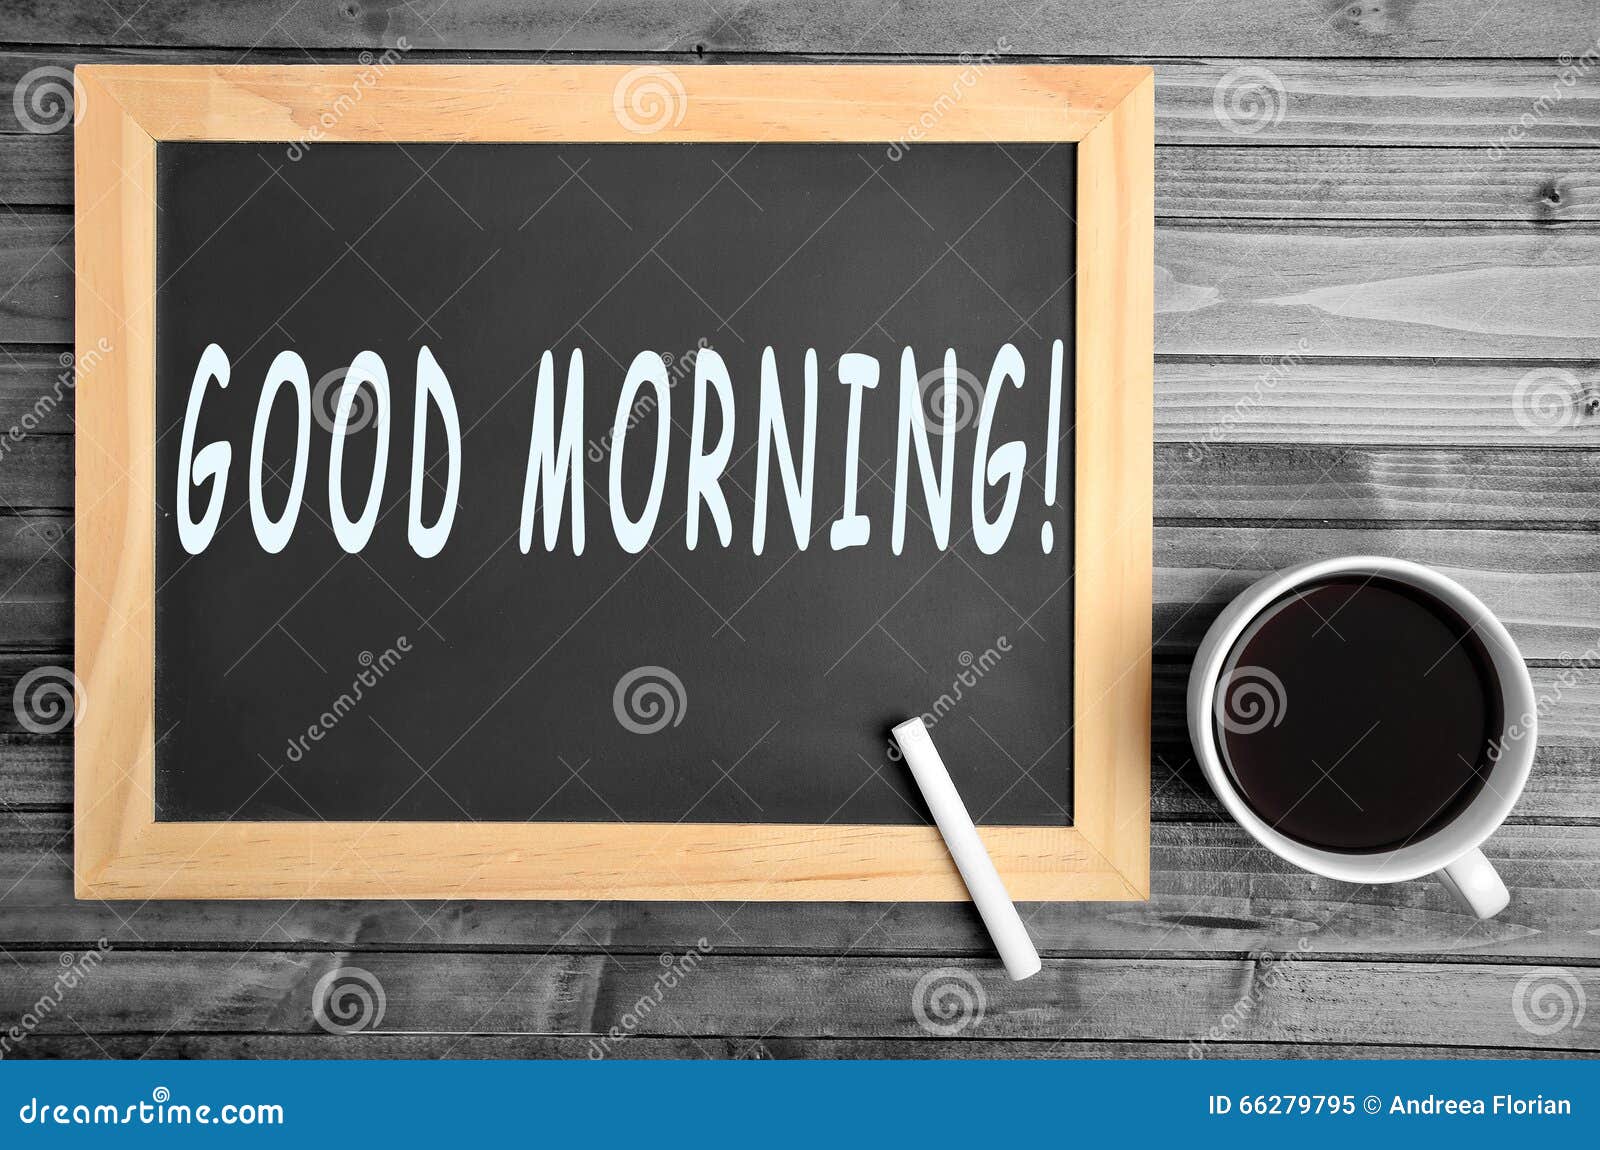 Good morning words stock image. Image of drink, flavor - 66279795